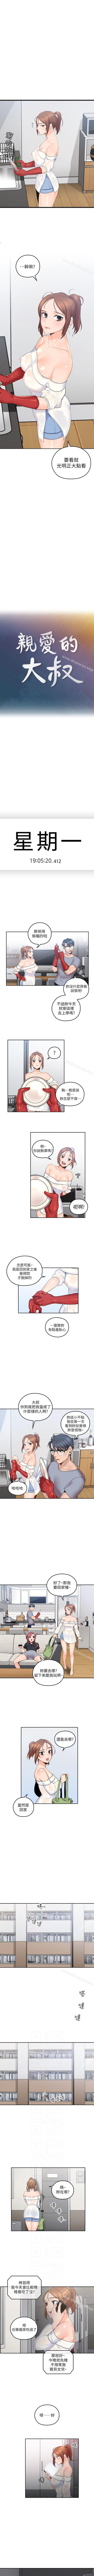 Tight Cunt 親愛的大叔 1-50 Free Real Porn - Page 8